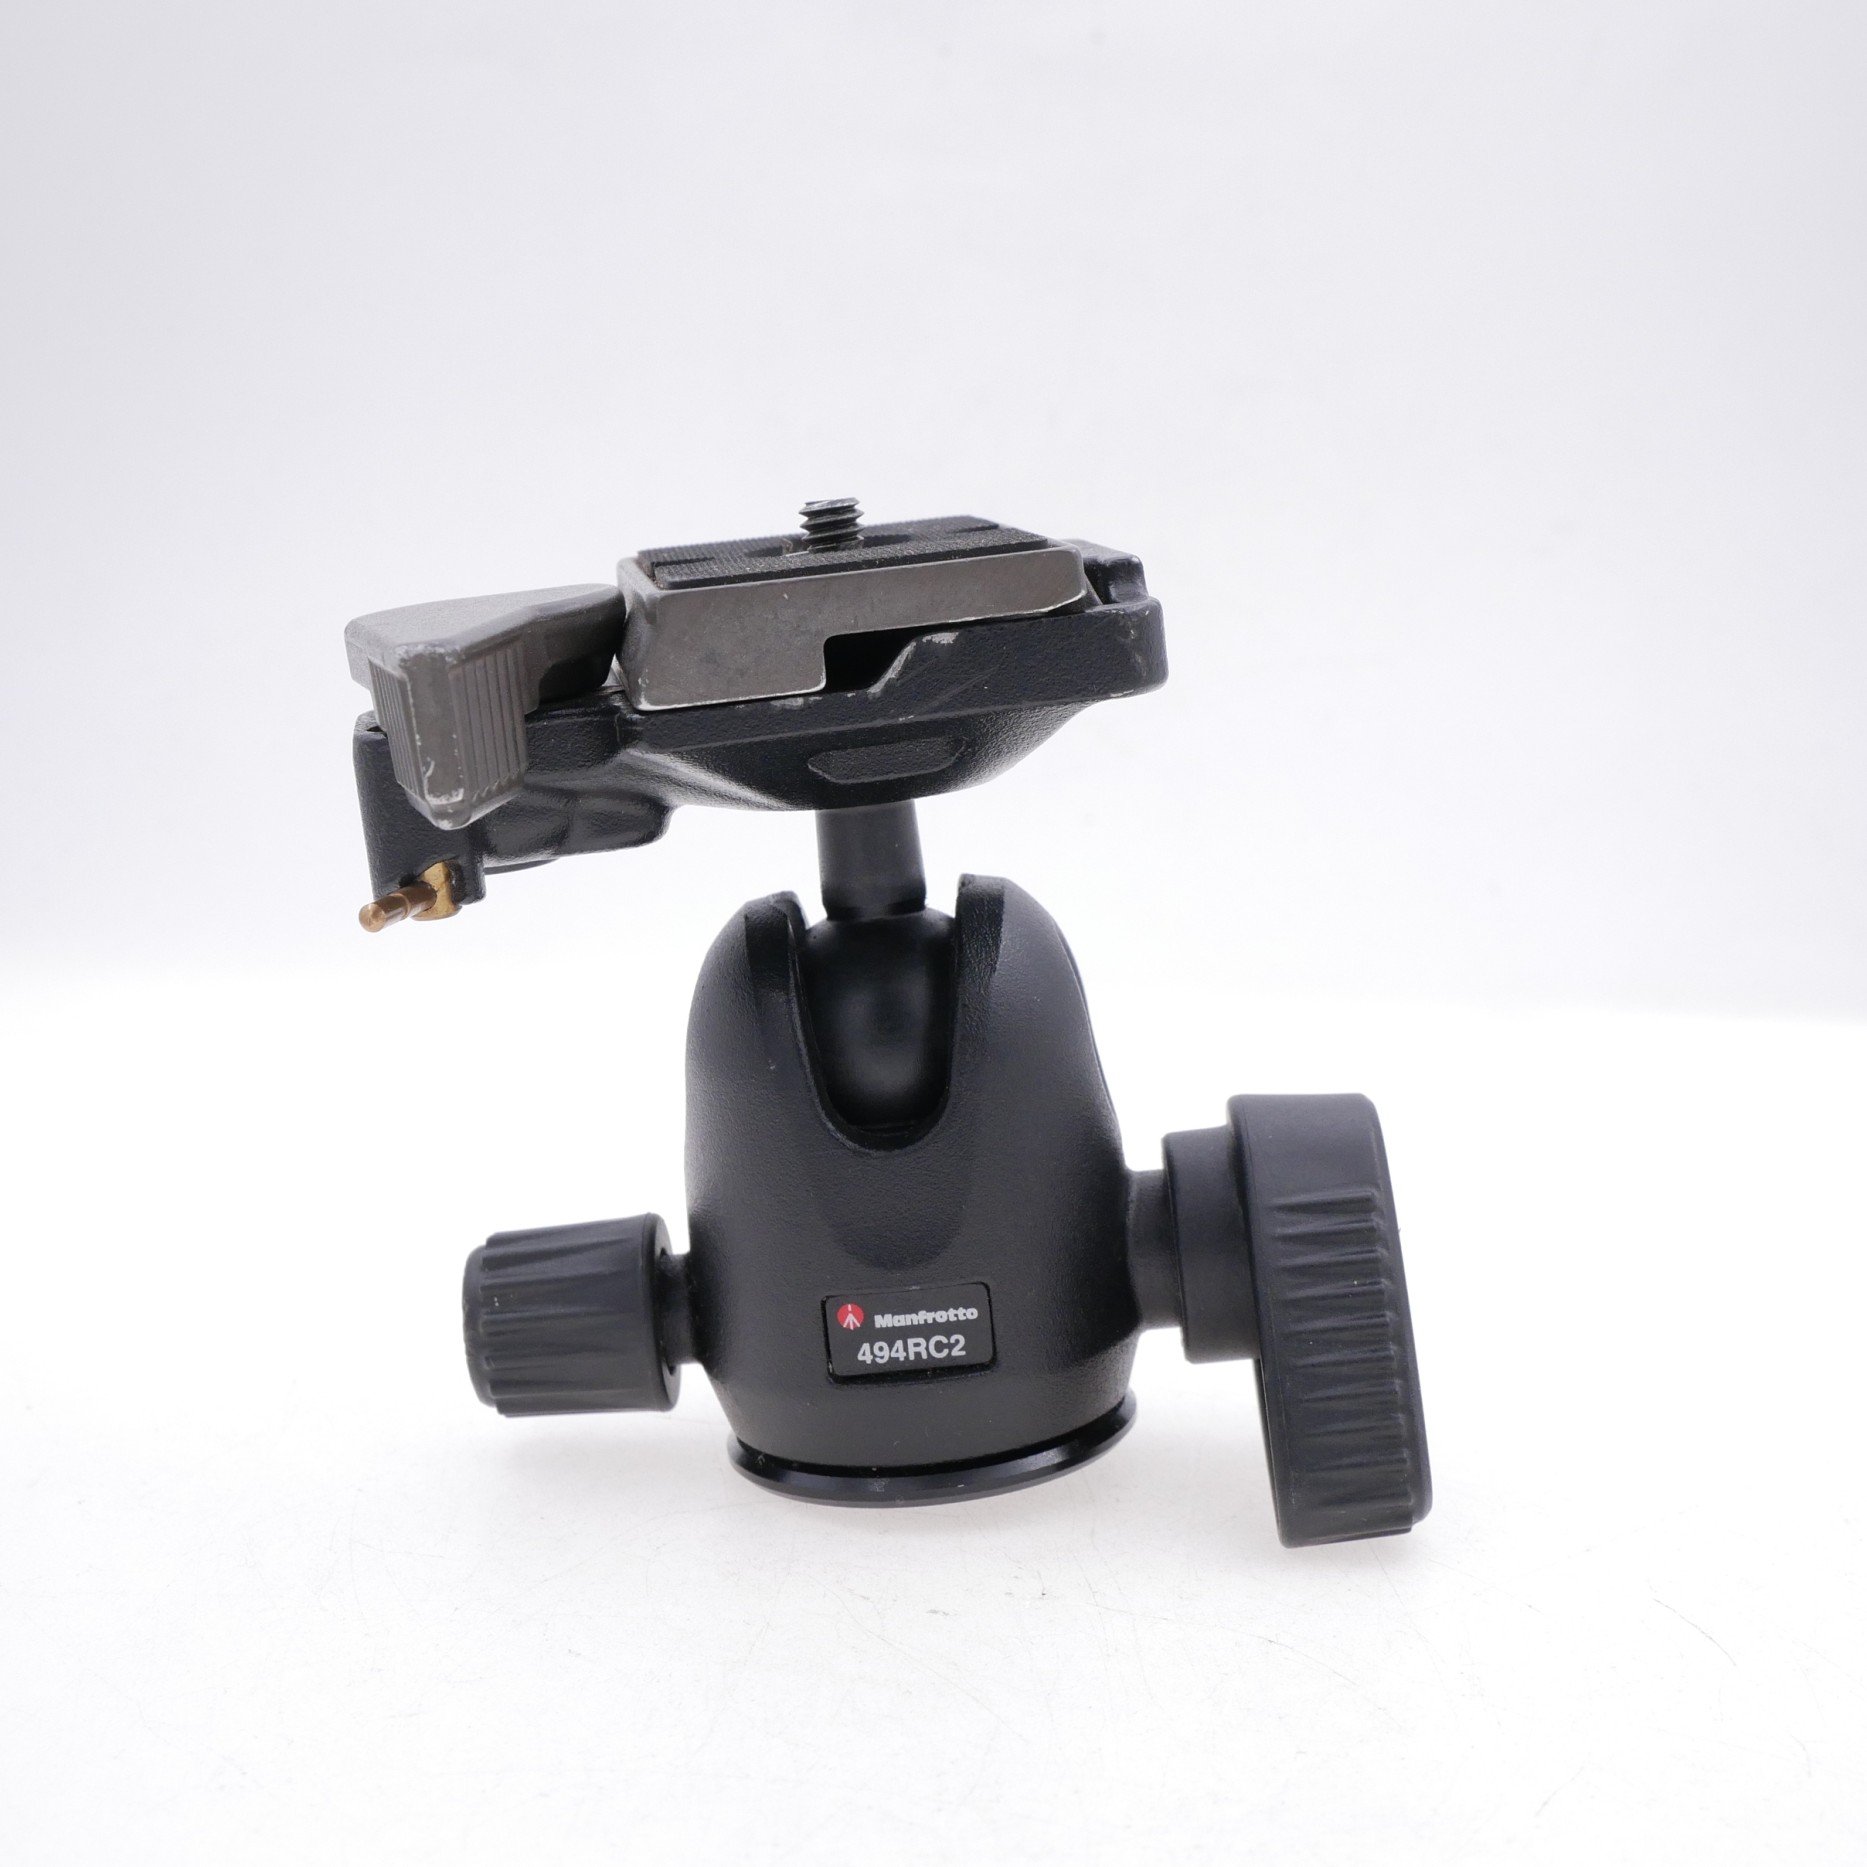 Manfrotto 494RC2 Ball Head 